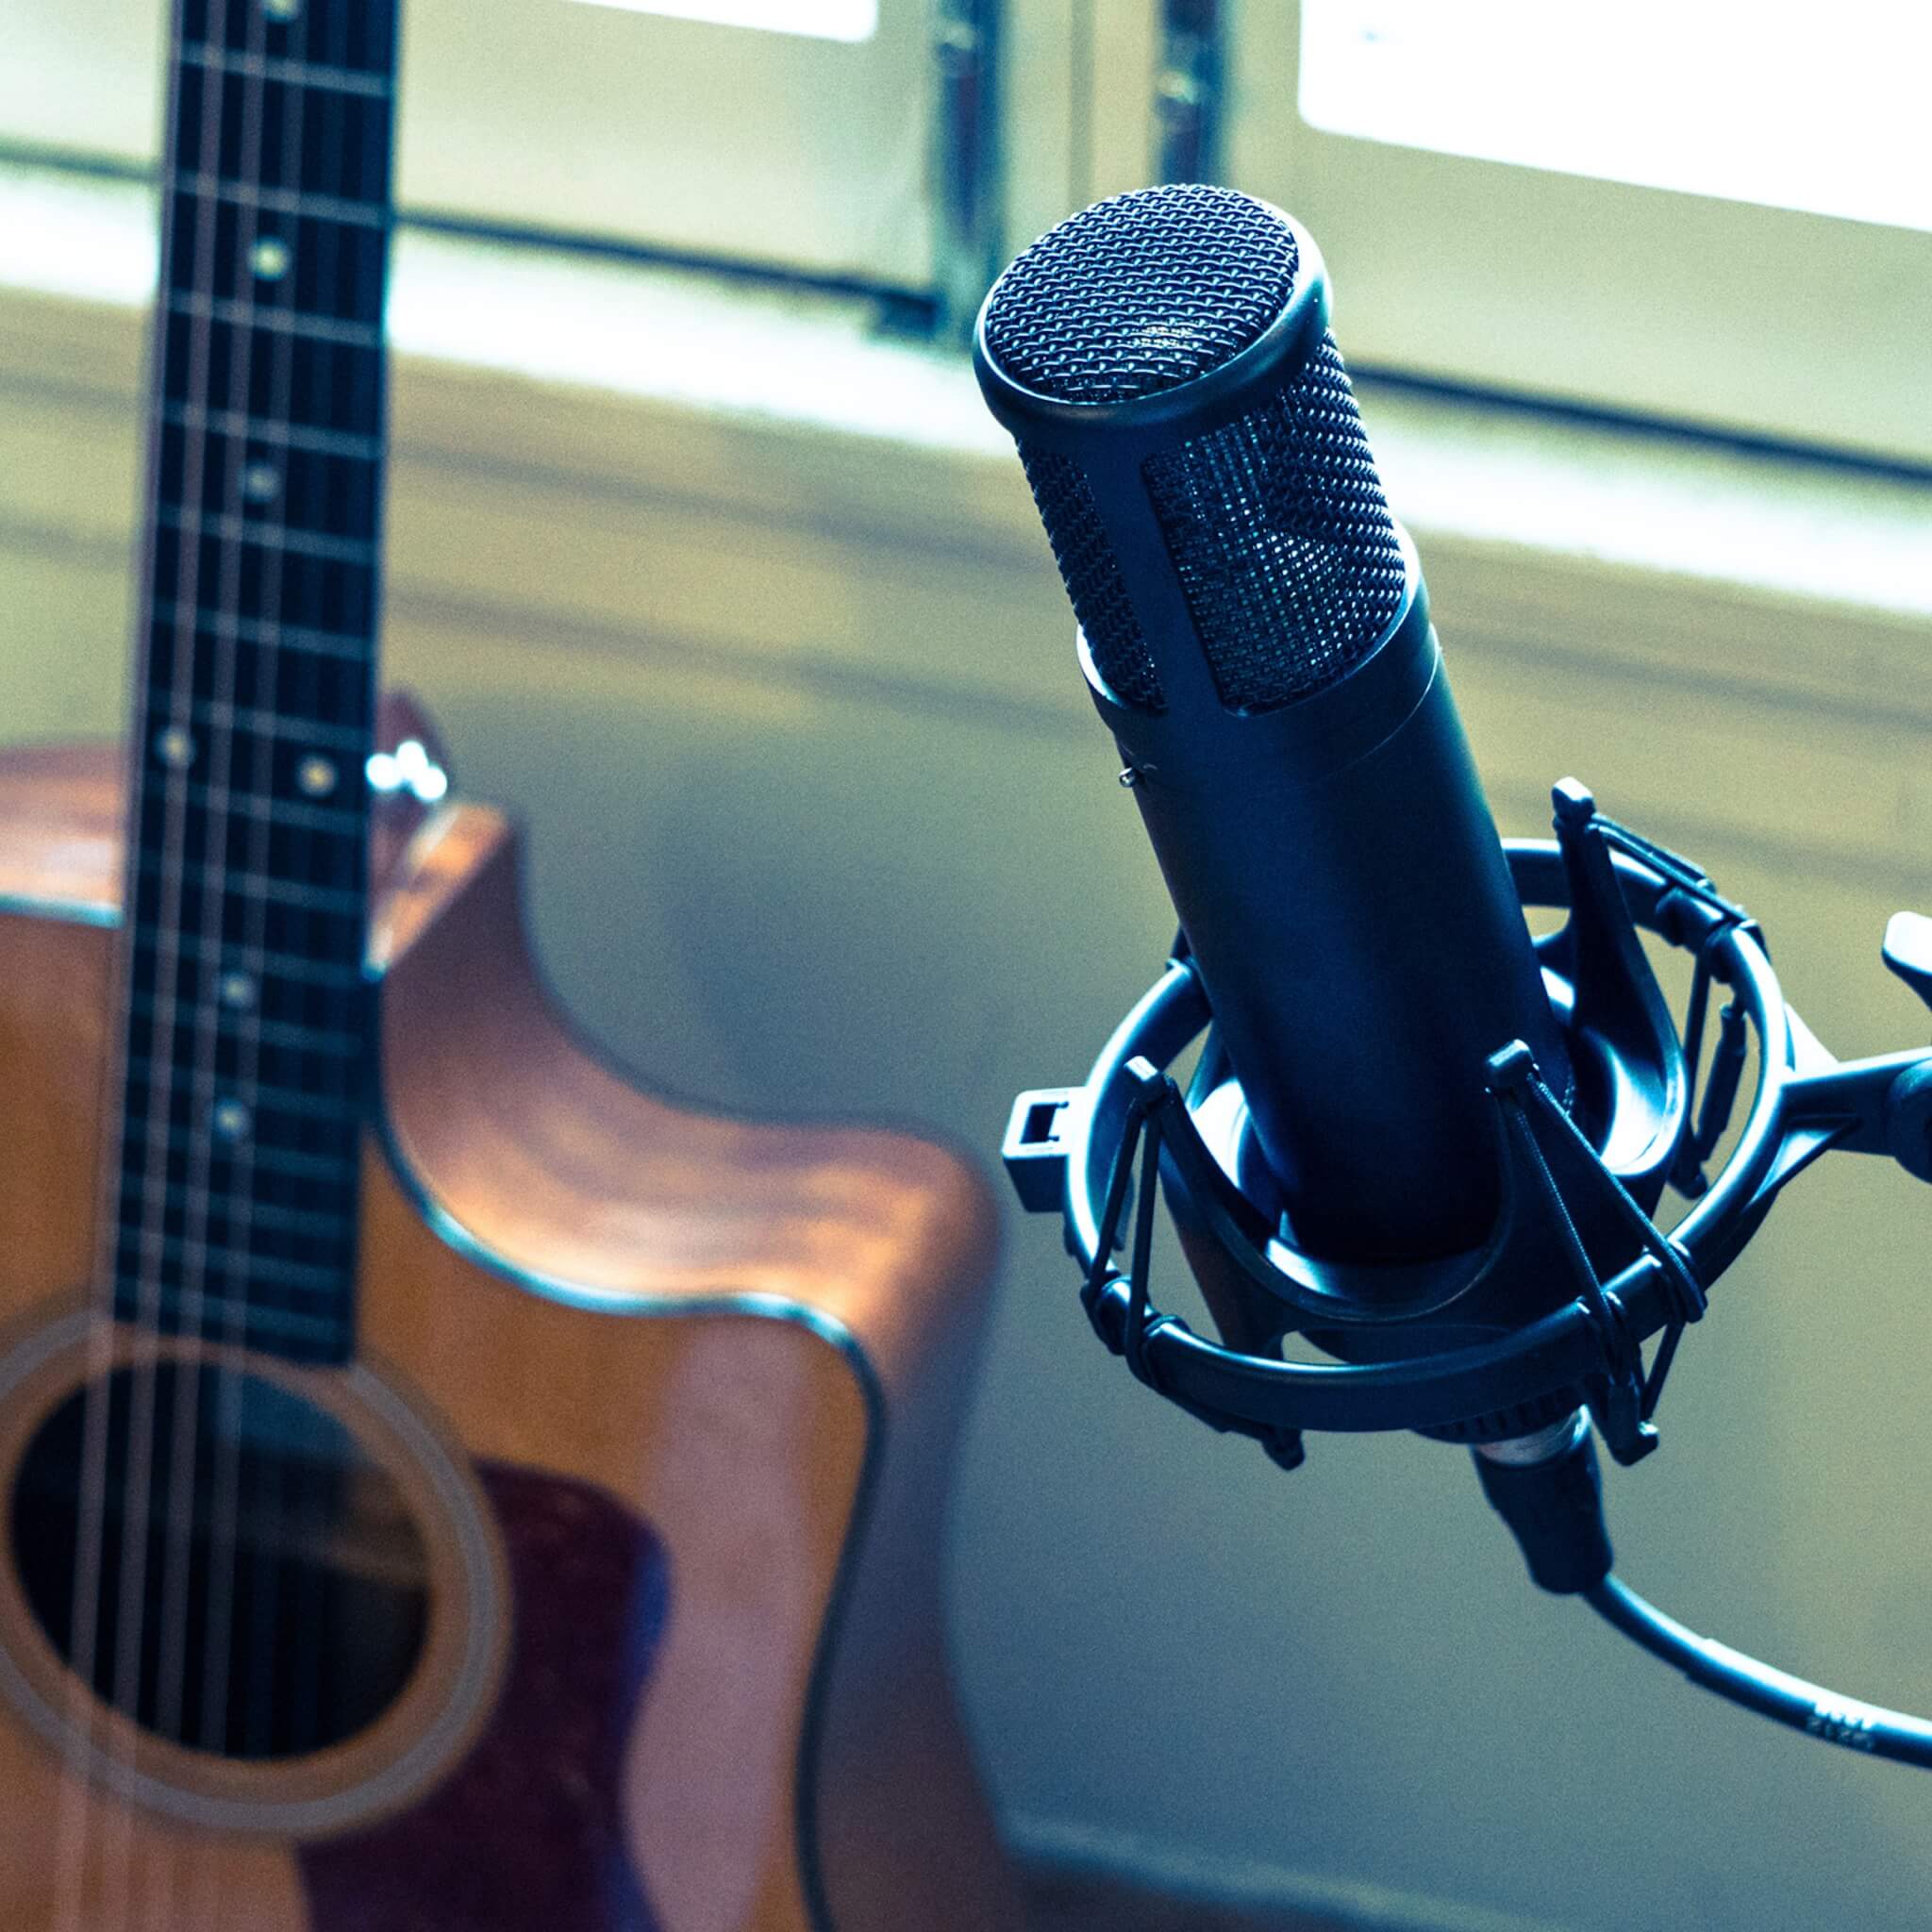 sE Electronics sE2200 - Large Diaphragm Cardioid Condenser Microphone, in use with an acoustic guitar